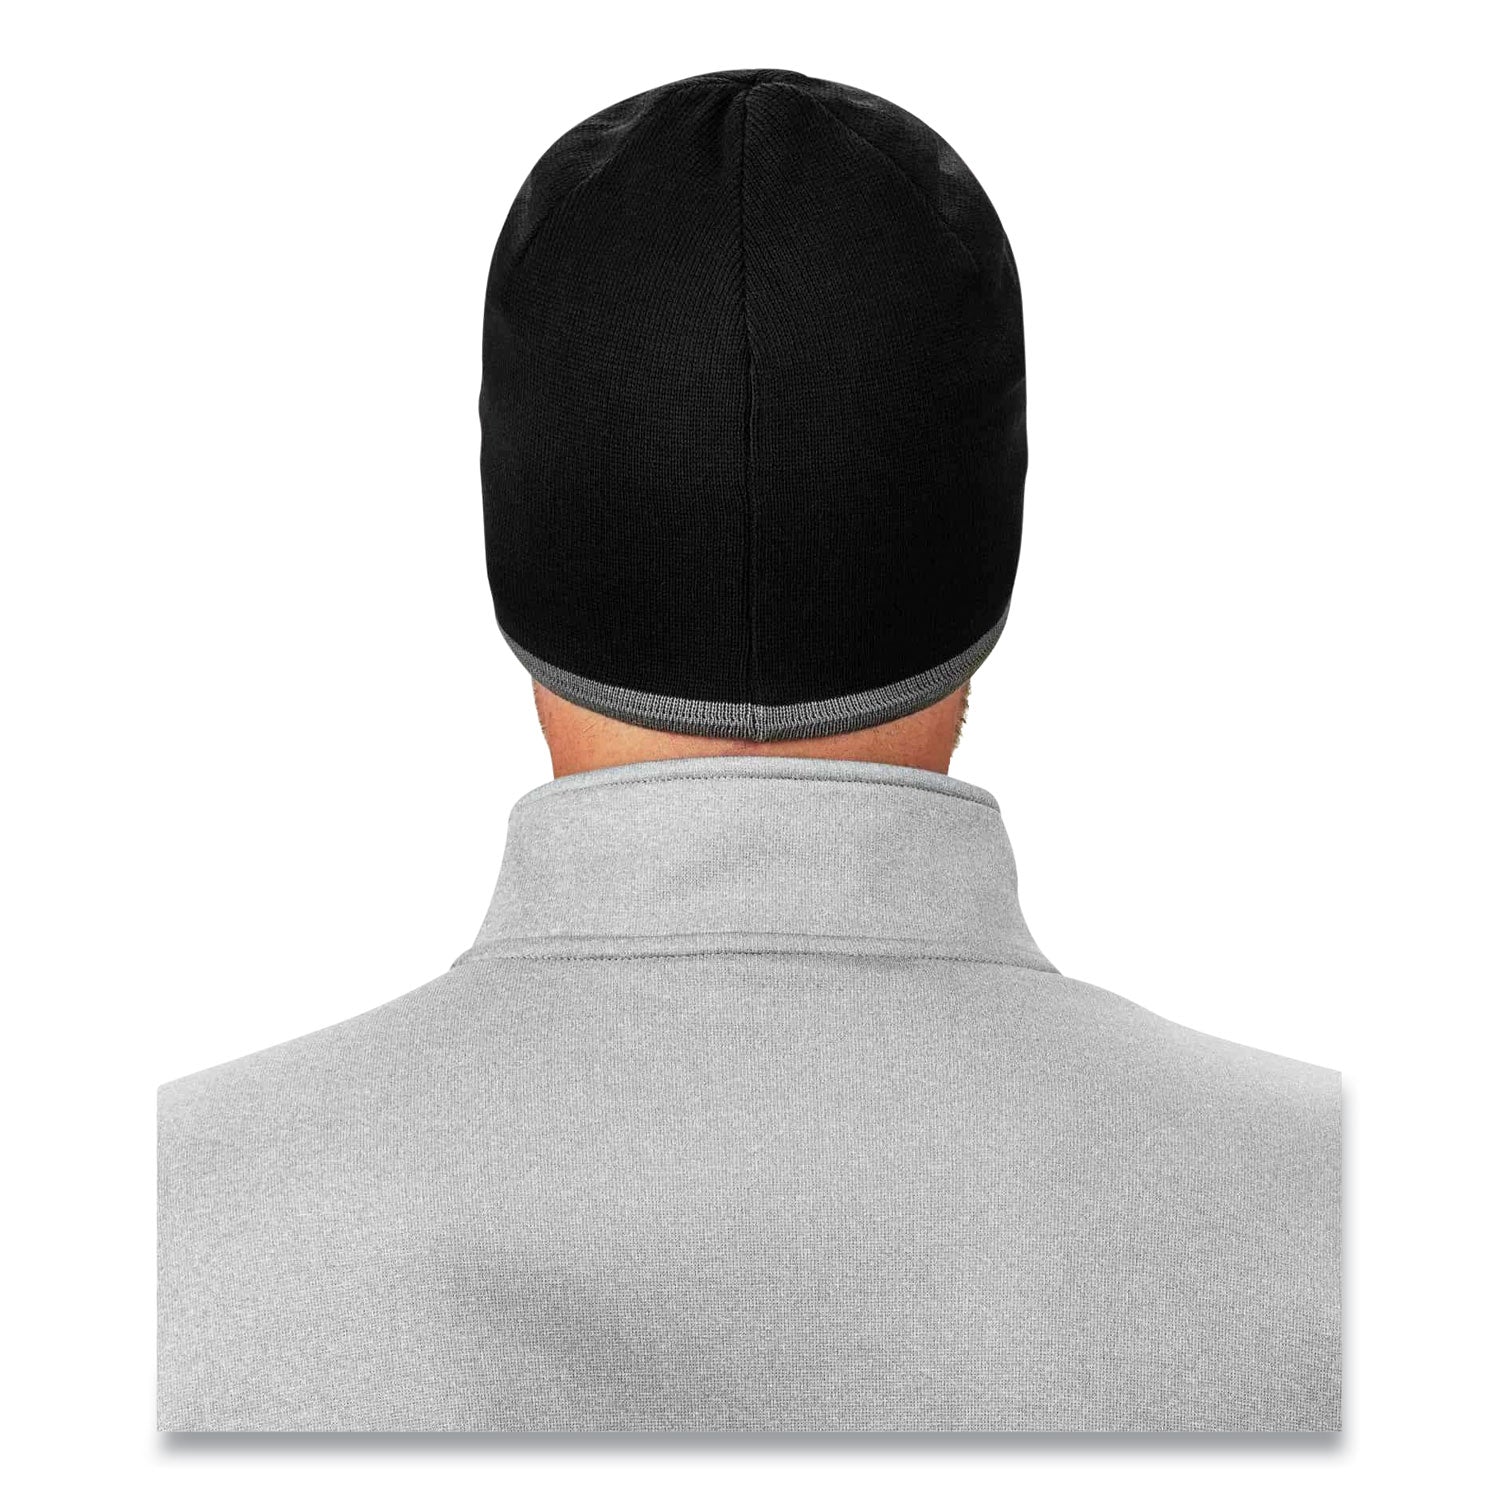 n-ferno-6818-knit-winter-hat-fleece-lined-one-size-fits-most-black-ships-in-1-3-business-days_ego16818 - 7